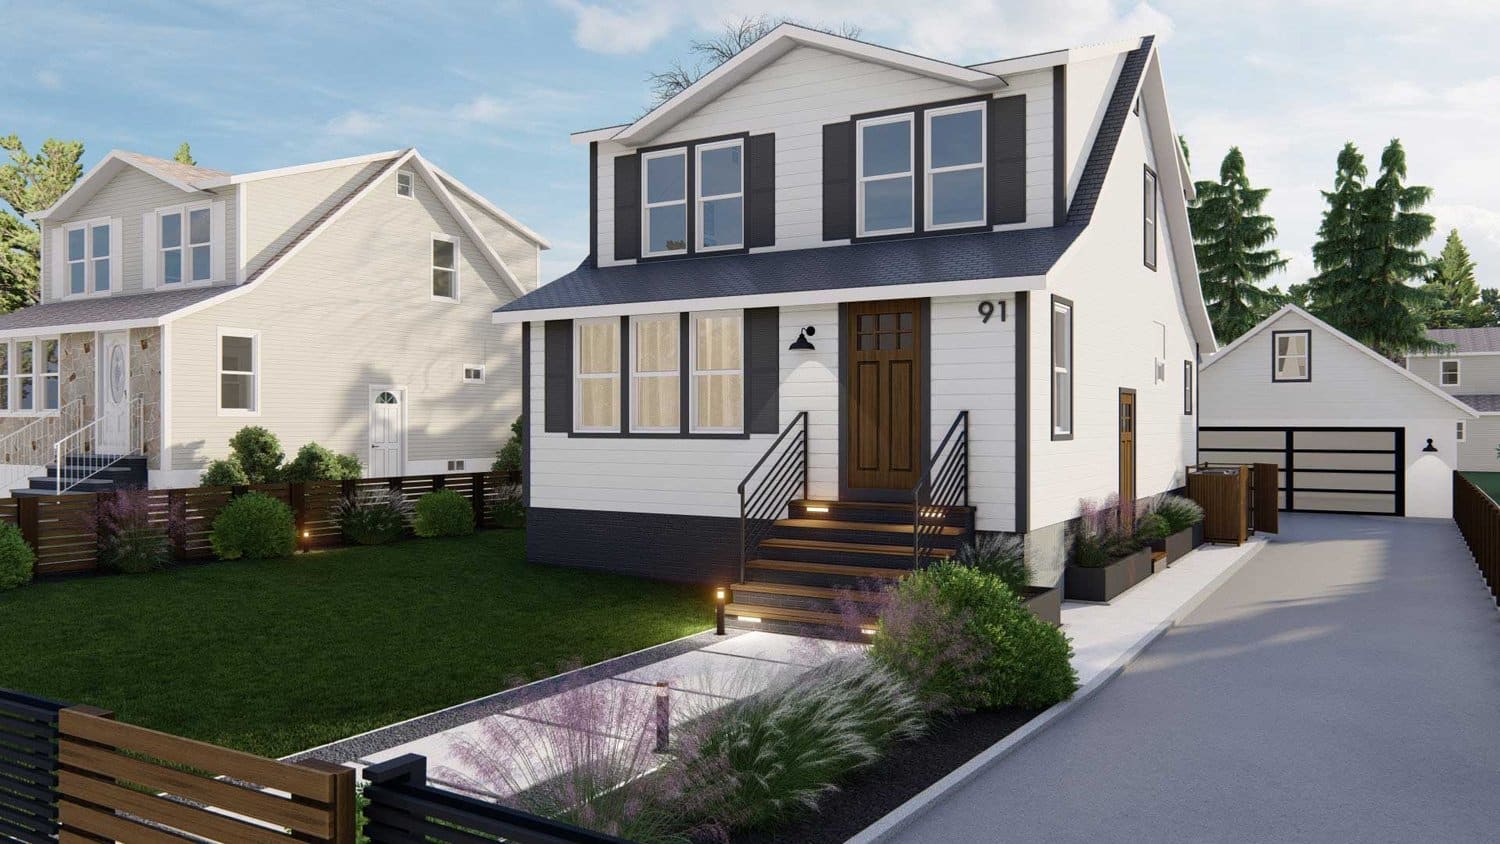 Ocean City front yard design with concrete drive way and paver path